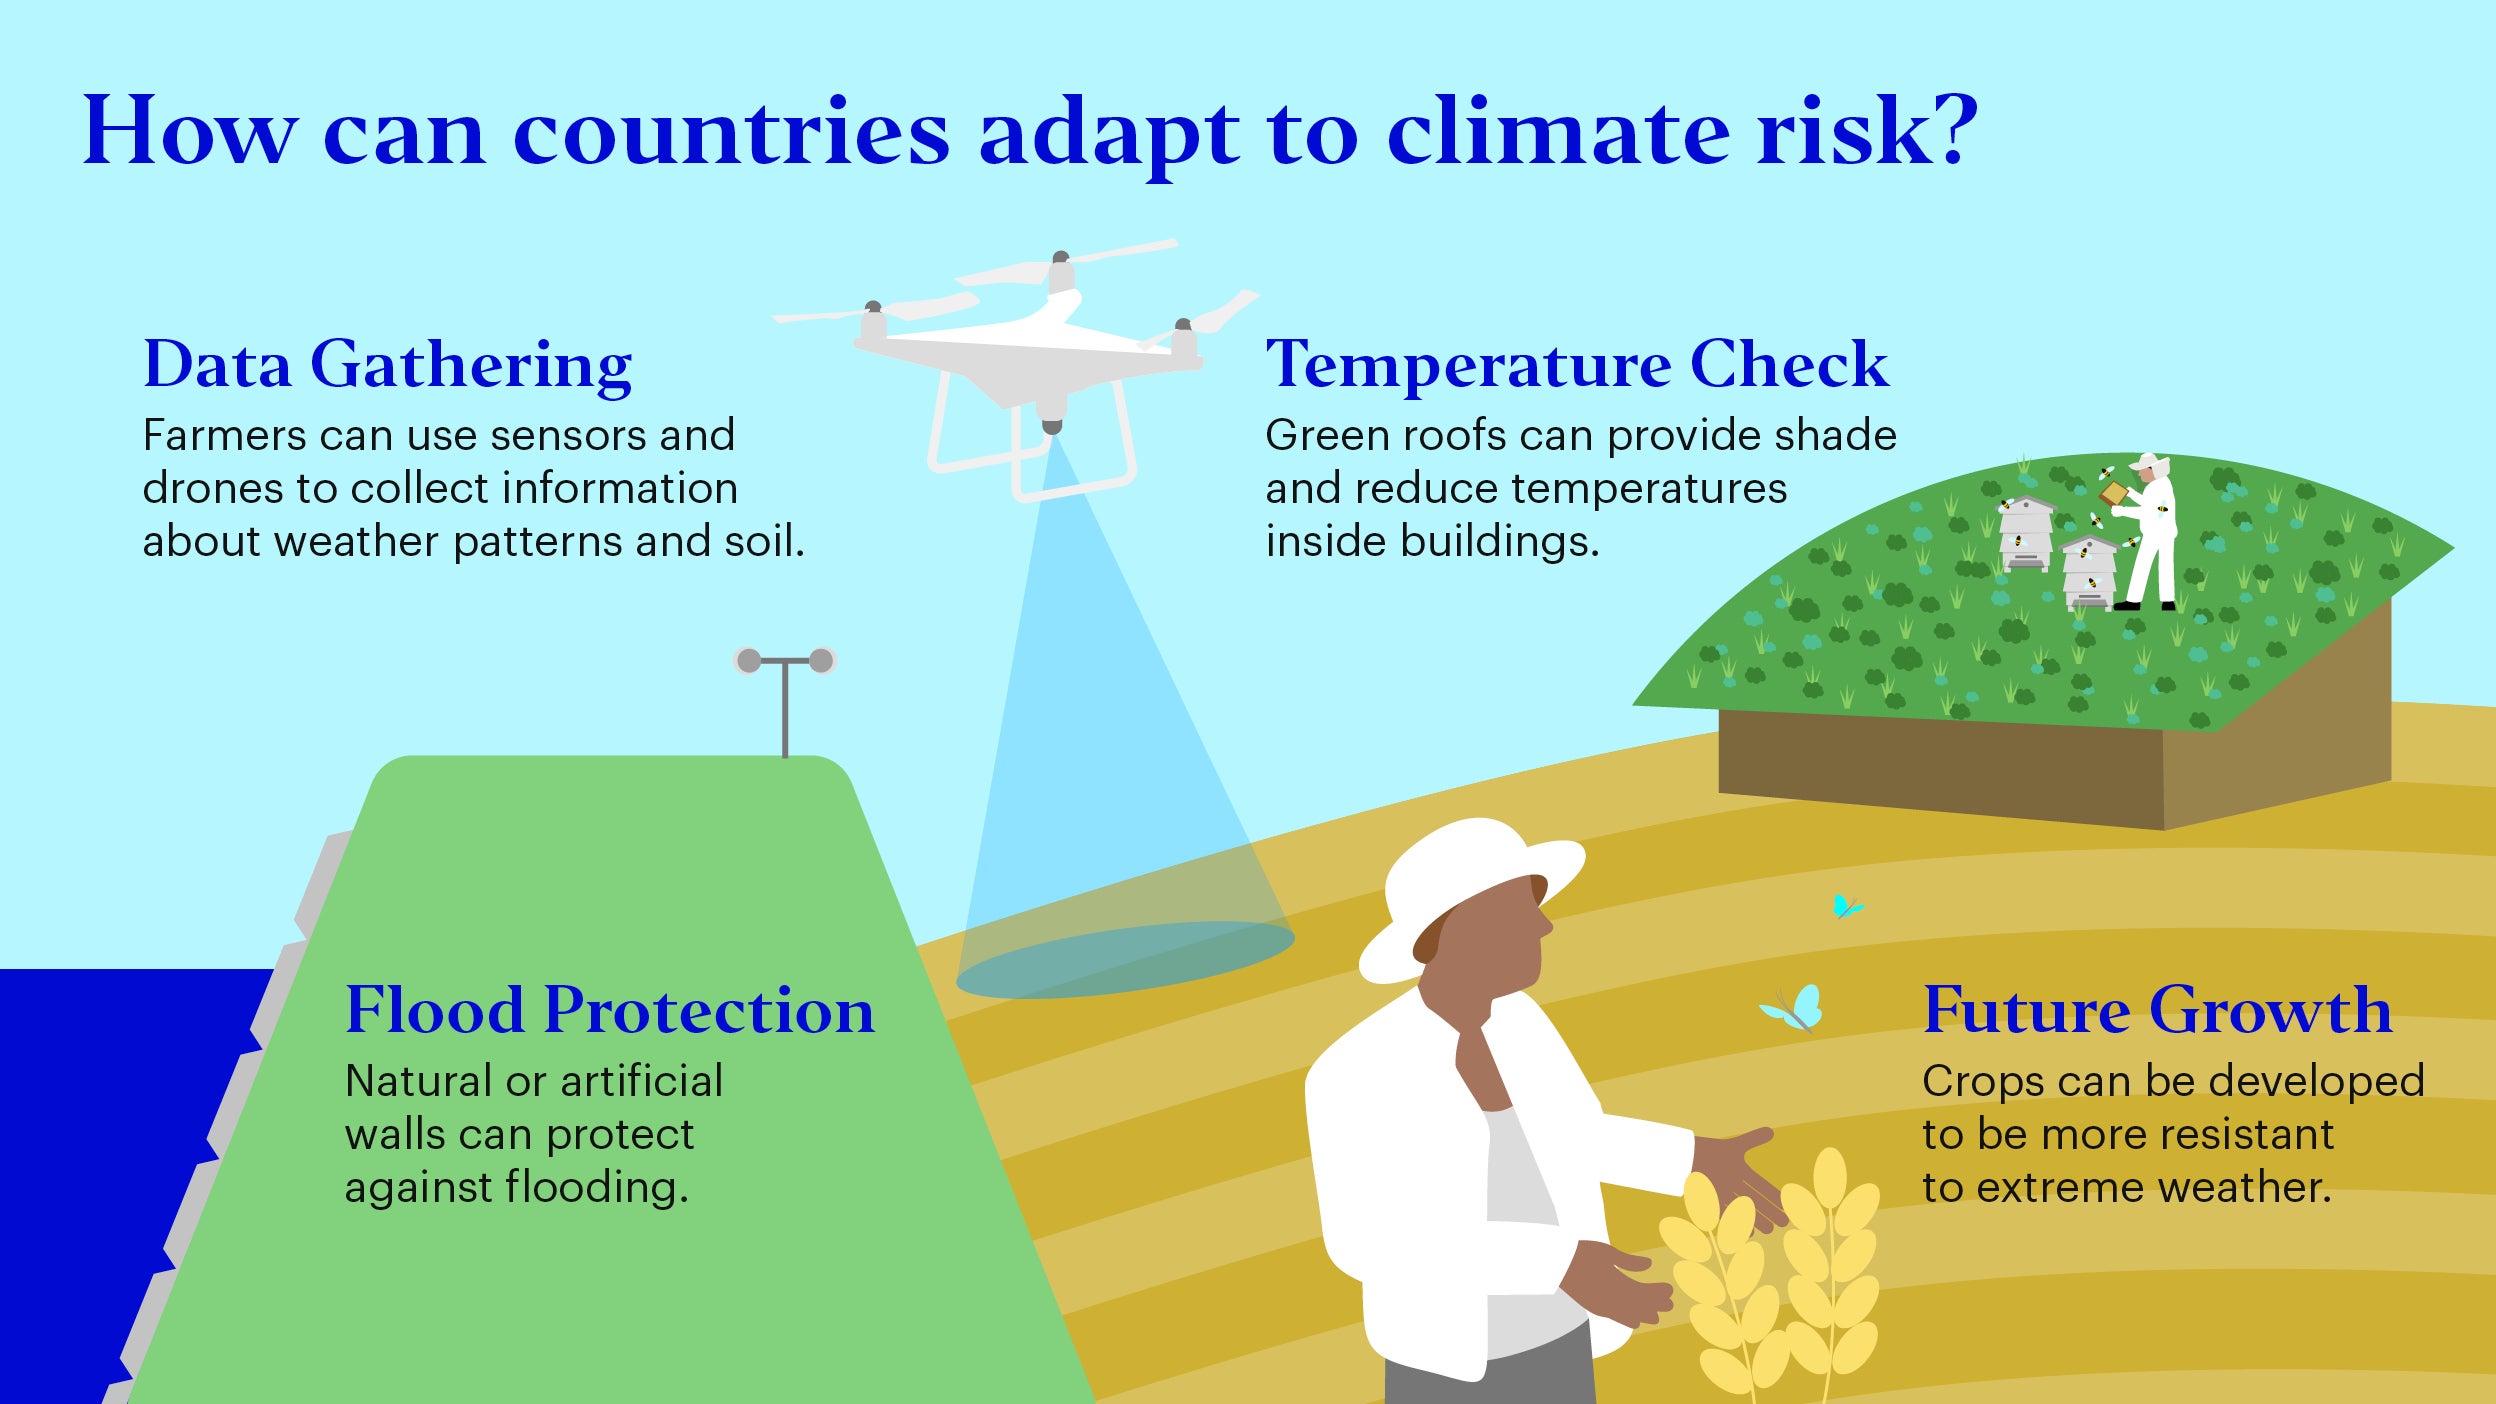 How can countries adapt to climate risk?